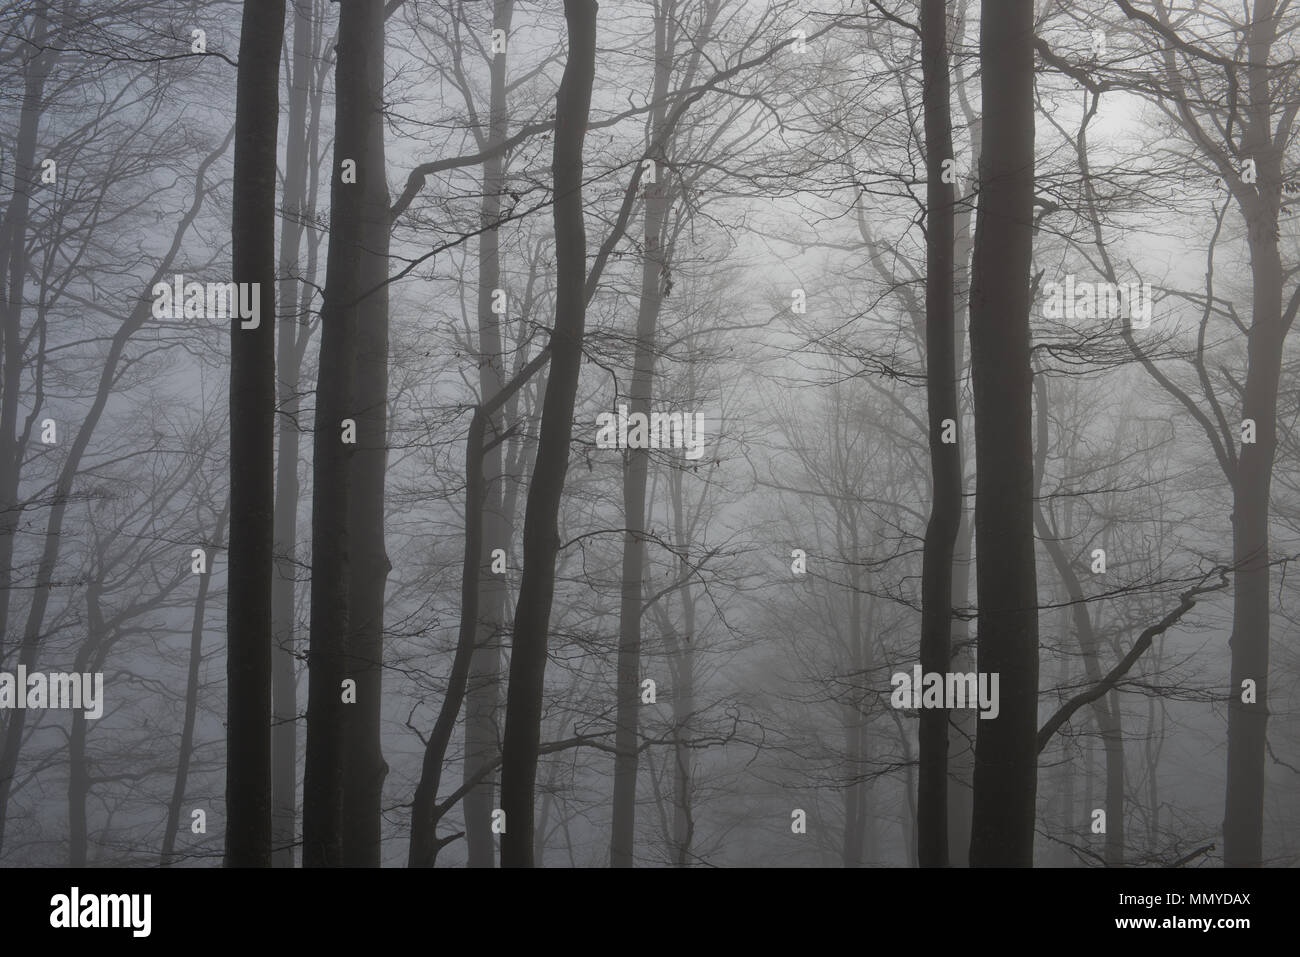 leaveless stems and branches of a beech tree forest in heavy winter fog contrasting against the light Stock Photo